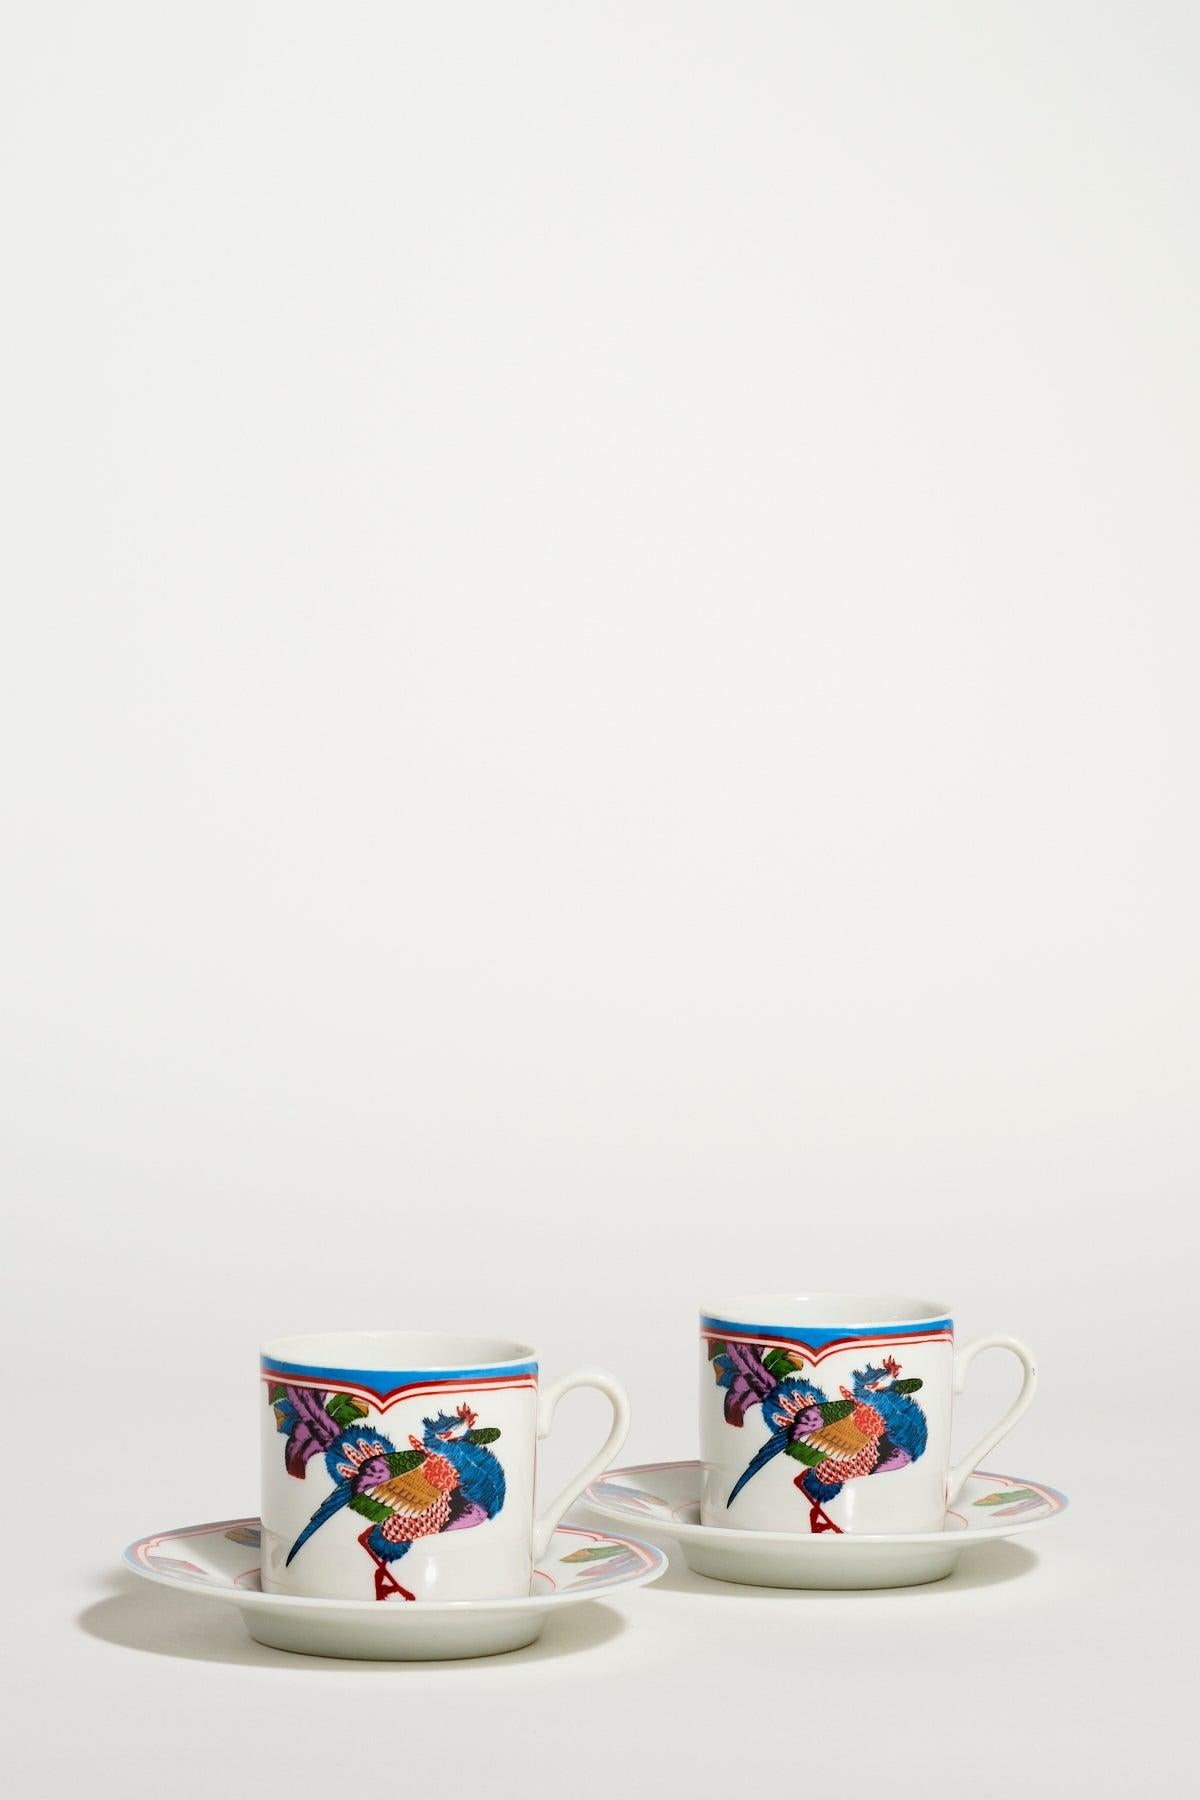 Porcelain tea set with ornate peacock design by the mid-century glassware and ceramics designer Georges Briard.